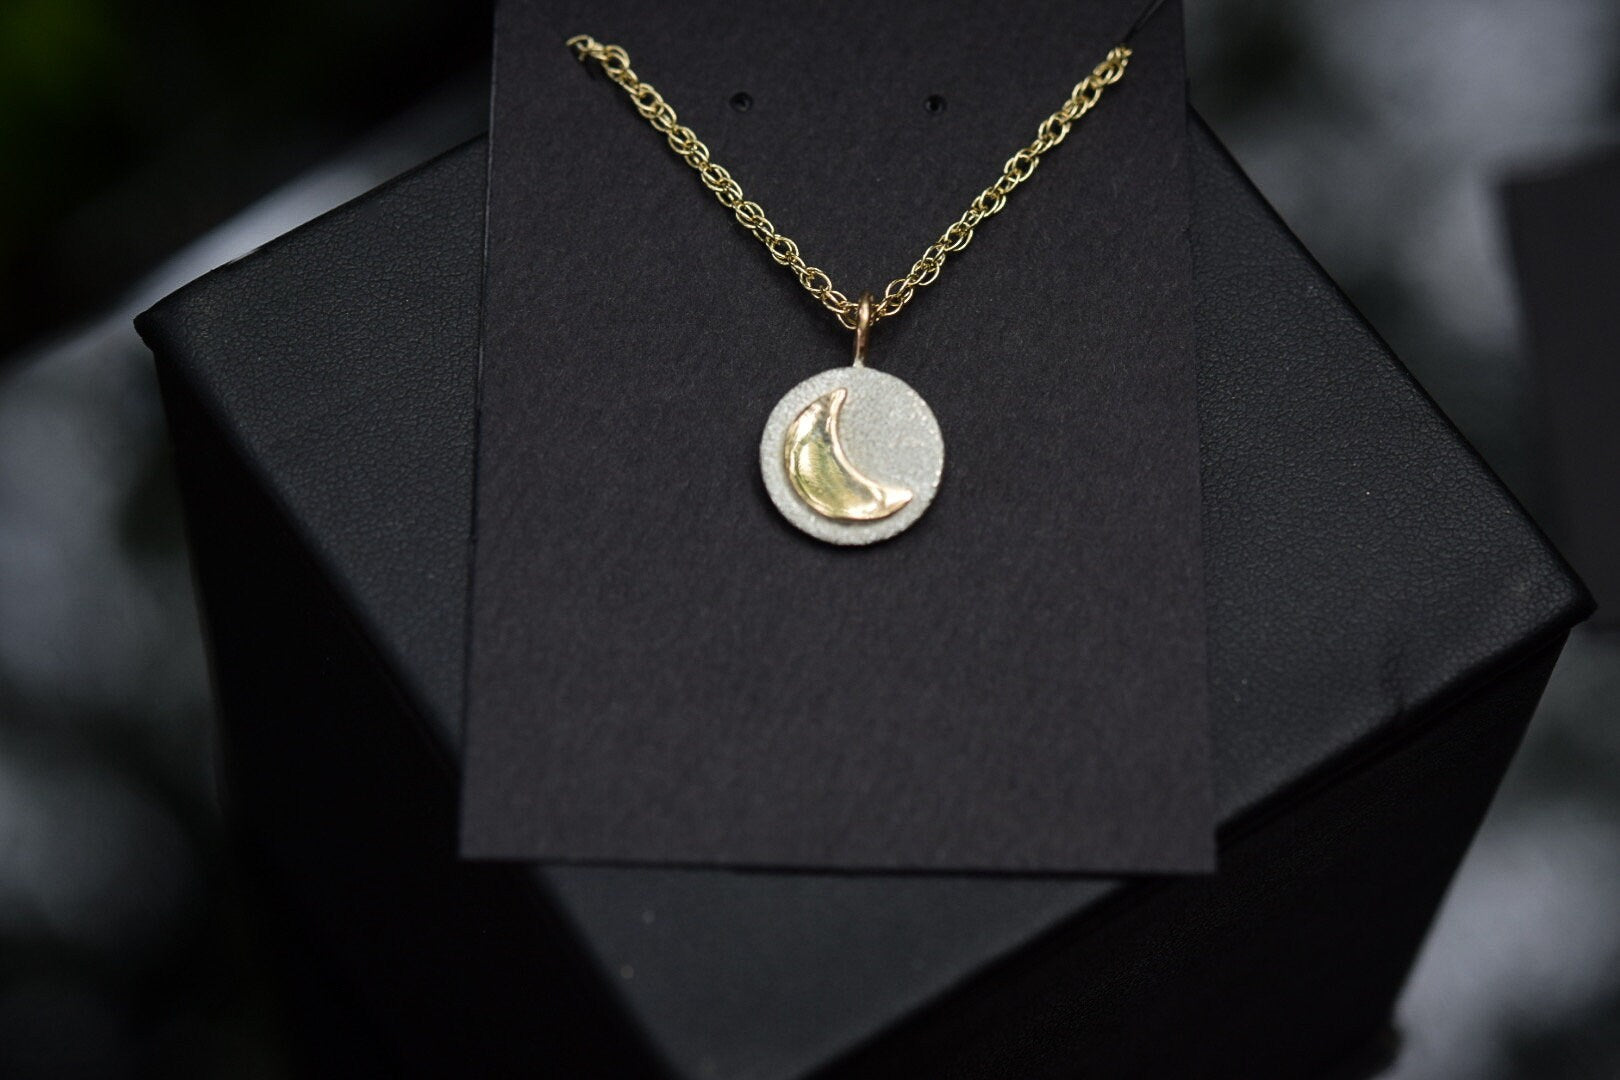 Crescent Moon Medallion Necklace/ Sterling Silver/ Gold Filled/ Mixed Metals/ Small Necklace/ Silver and Gold